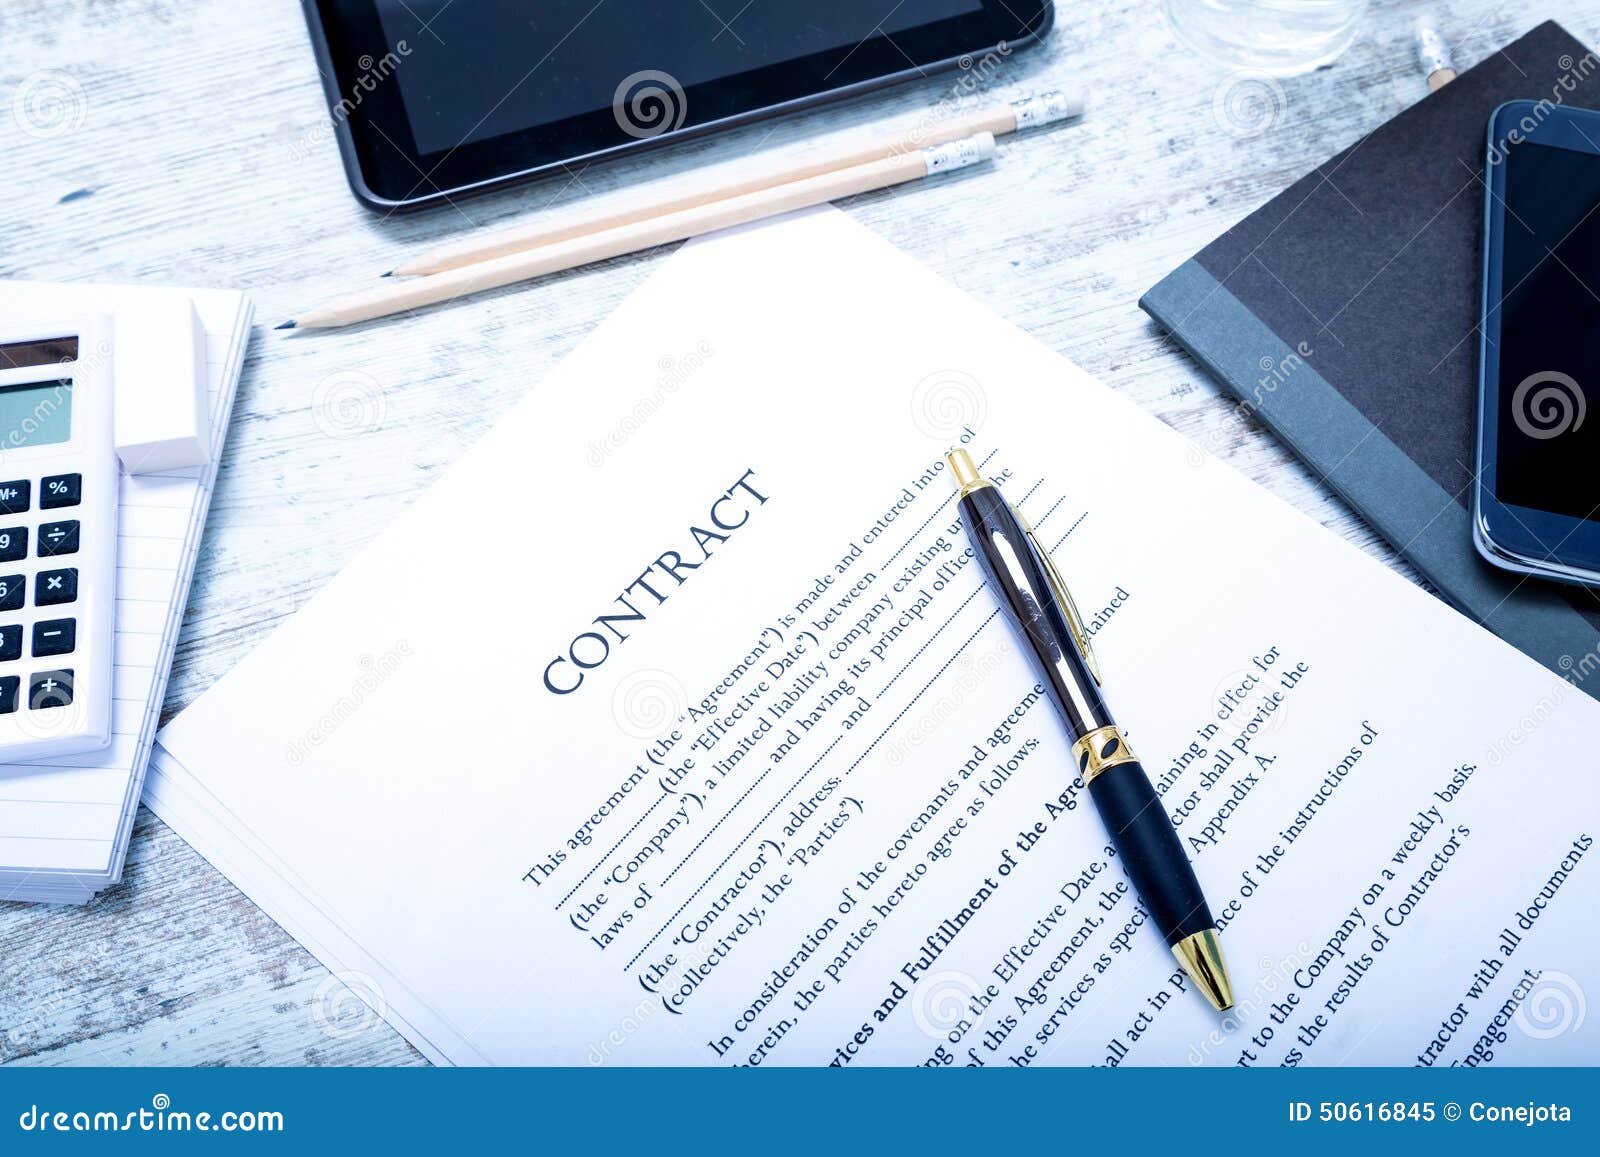 Sign a Contract stock image. Image of negotiations, deal - 50616845